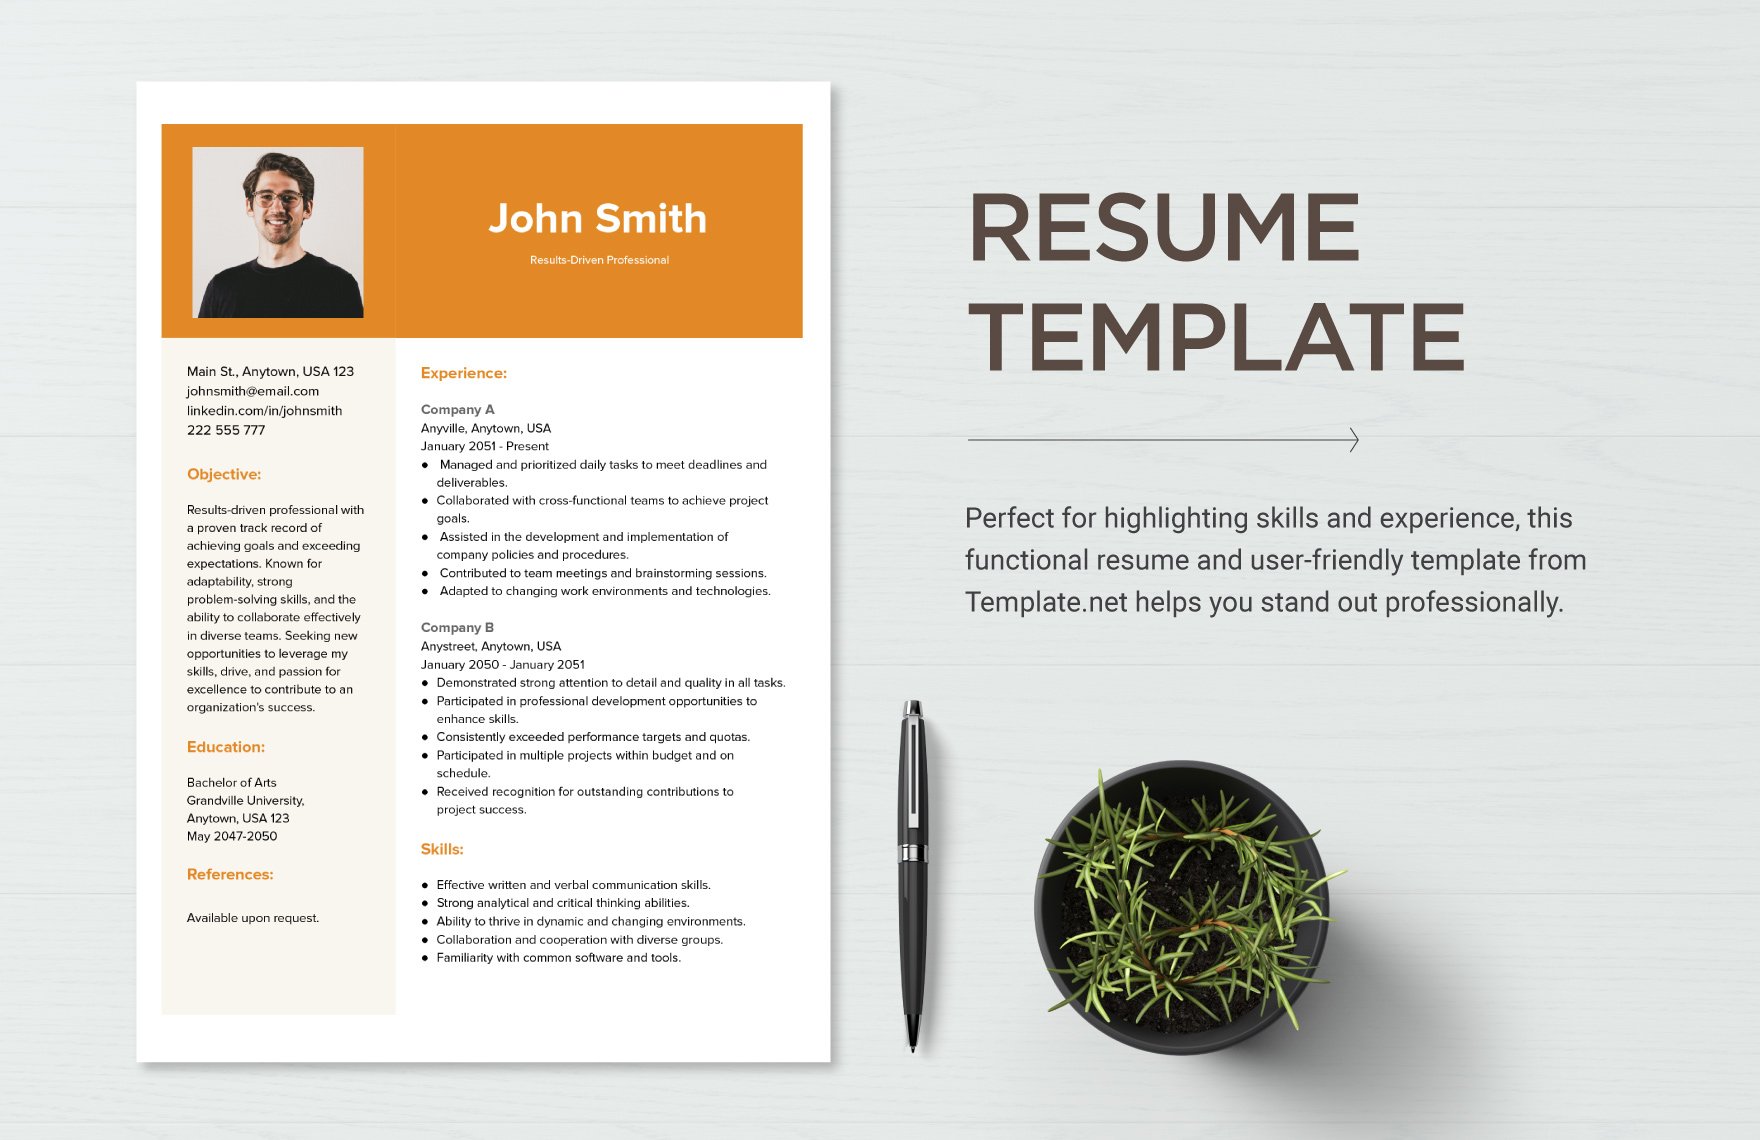 Free Resume Template in Word, Google Docs, PDF, Apple Pages, Publisher